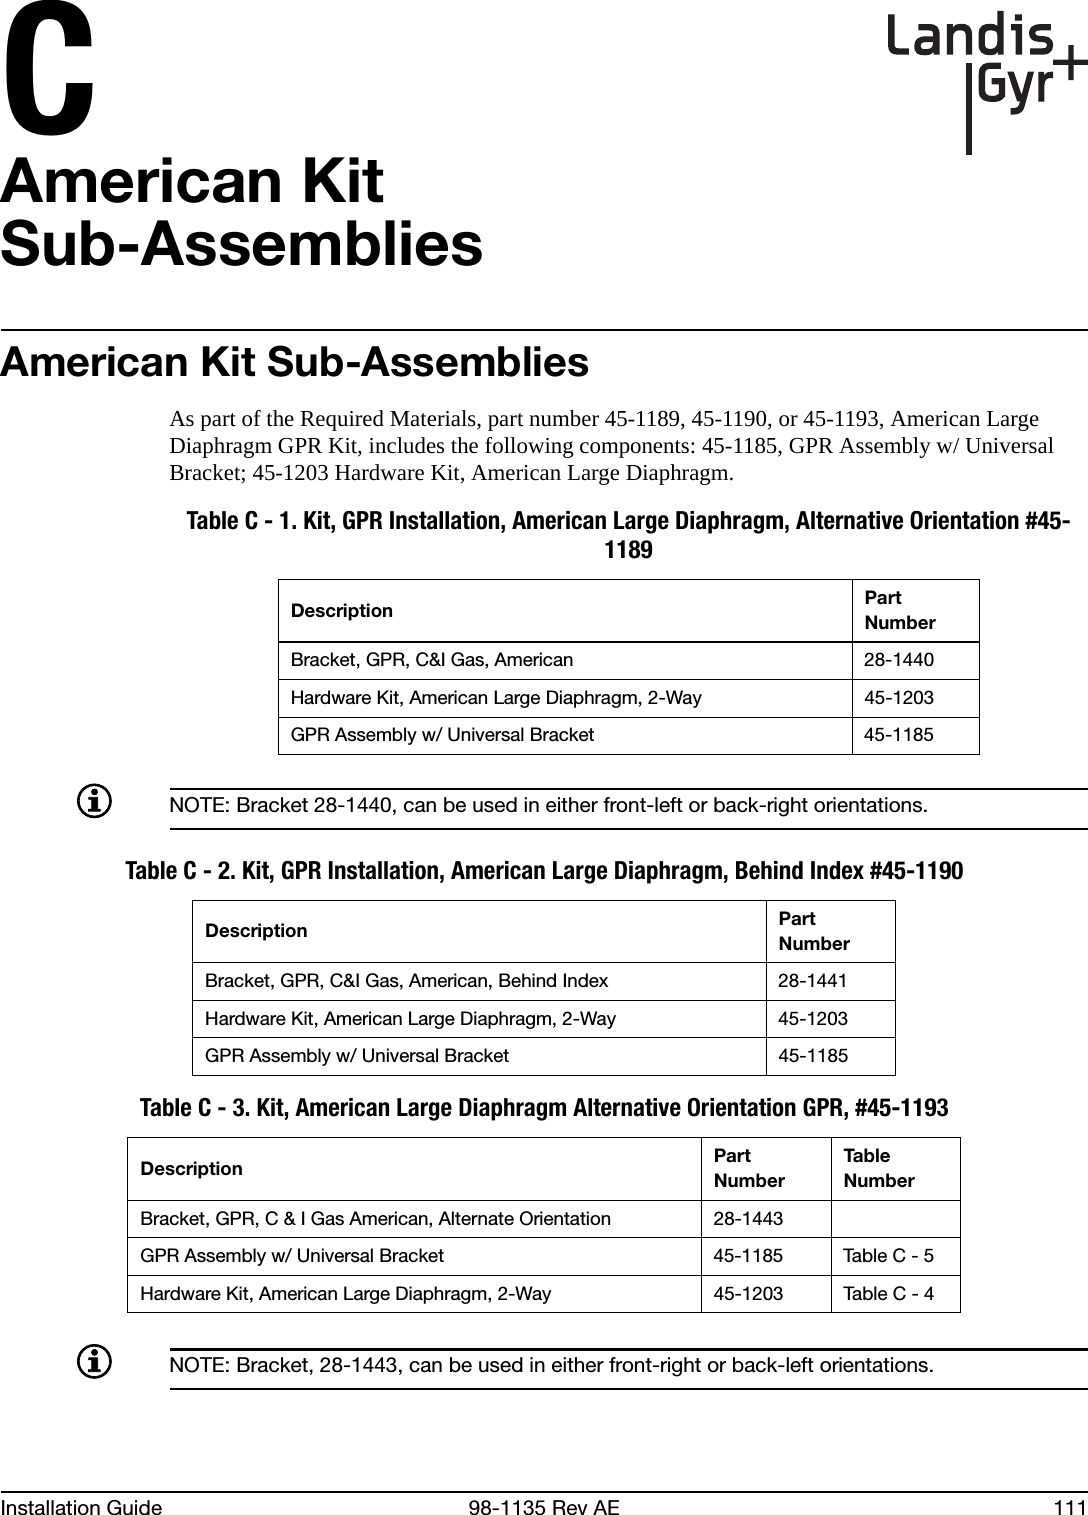 CInstallation Guide 98-1135 Rev AE 111American KitSub-AssembliesAmerican Kit Sub-AssembliesAs part of the Required Materials, part number 45-1189, 45-1190, or 45-1193, American Large Diaphragm GPR Kit, includes the following components: 45-1185, GPR Assembly w/ Universal Bracket; 45-1203 Hardware Kit, American Large Diaphragm.NOTE: Bracket 28-1440, can be used in either front-left or back-right orientations.NOTE: Bracket, 28-1443, can be used in either front-right or back-left orientations.Table C - 1. Kit, GPR Installation, American Large Diaphragm, Alternative Orientation #45-1189Description Part NumberBracket, GPR, C&amp;I Gas, American 28-1440Hardware Kit, American Large Diaphragm, 2-Way 45-1203GPR Assembly w/ Universal Bracket 45-1185Table C - 2. Kit, GPR Installation, American Large Diaphragm, Behind Index #45-1190Description Part NumberBracket, GPR, C&amp;I Gas, American, Behind Index 28-1441Hardware Kit, American Large Diaphragm, 2-Way 45-1203GPR Assembly w/ Universal Bracket 45-1185Table C - 3. Kit, American Large Diaphragm Alternative Orientation GPR, #45-1193Description Part NumberTab l e  NumberBracket, GPR, C &amp; I Gas American, Alternate Orientation 28-1443GPR Assembly w/ Universal Bracket 45-1185 Table C - 5Hardware Kit, American Large Diaphragm, 2-Way 45-1203 Table C - 4